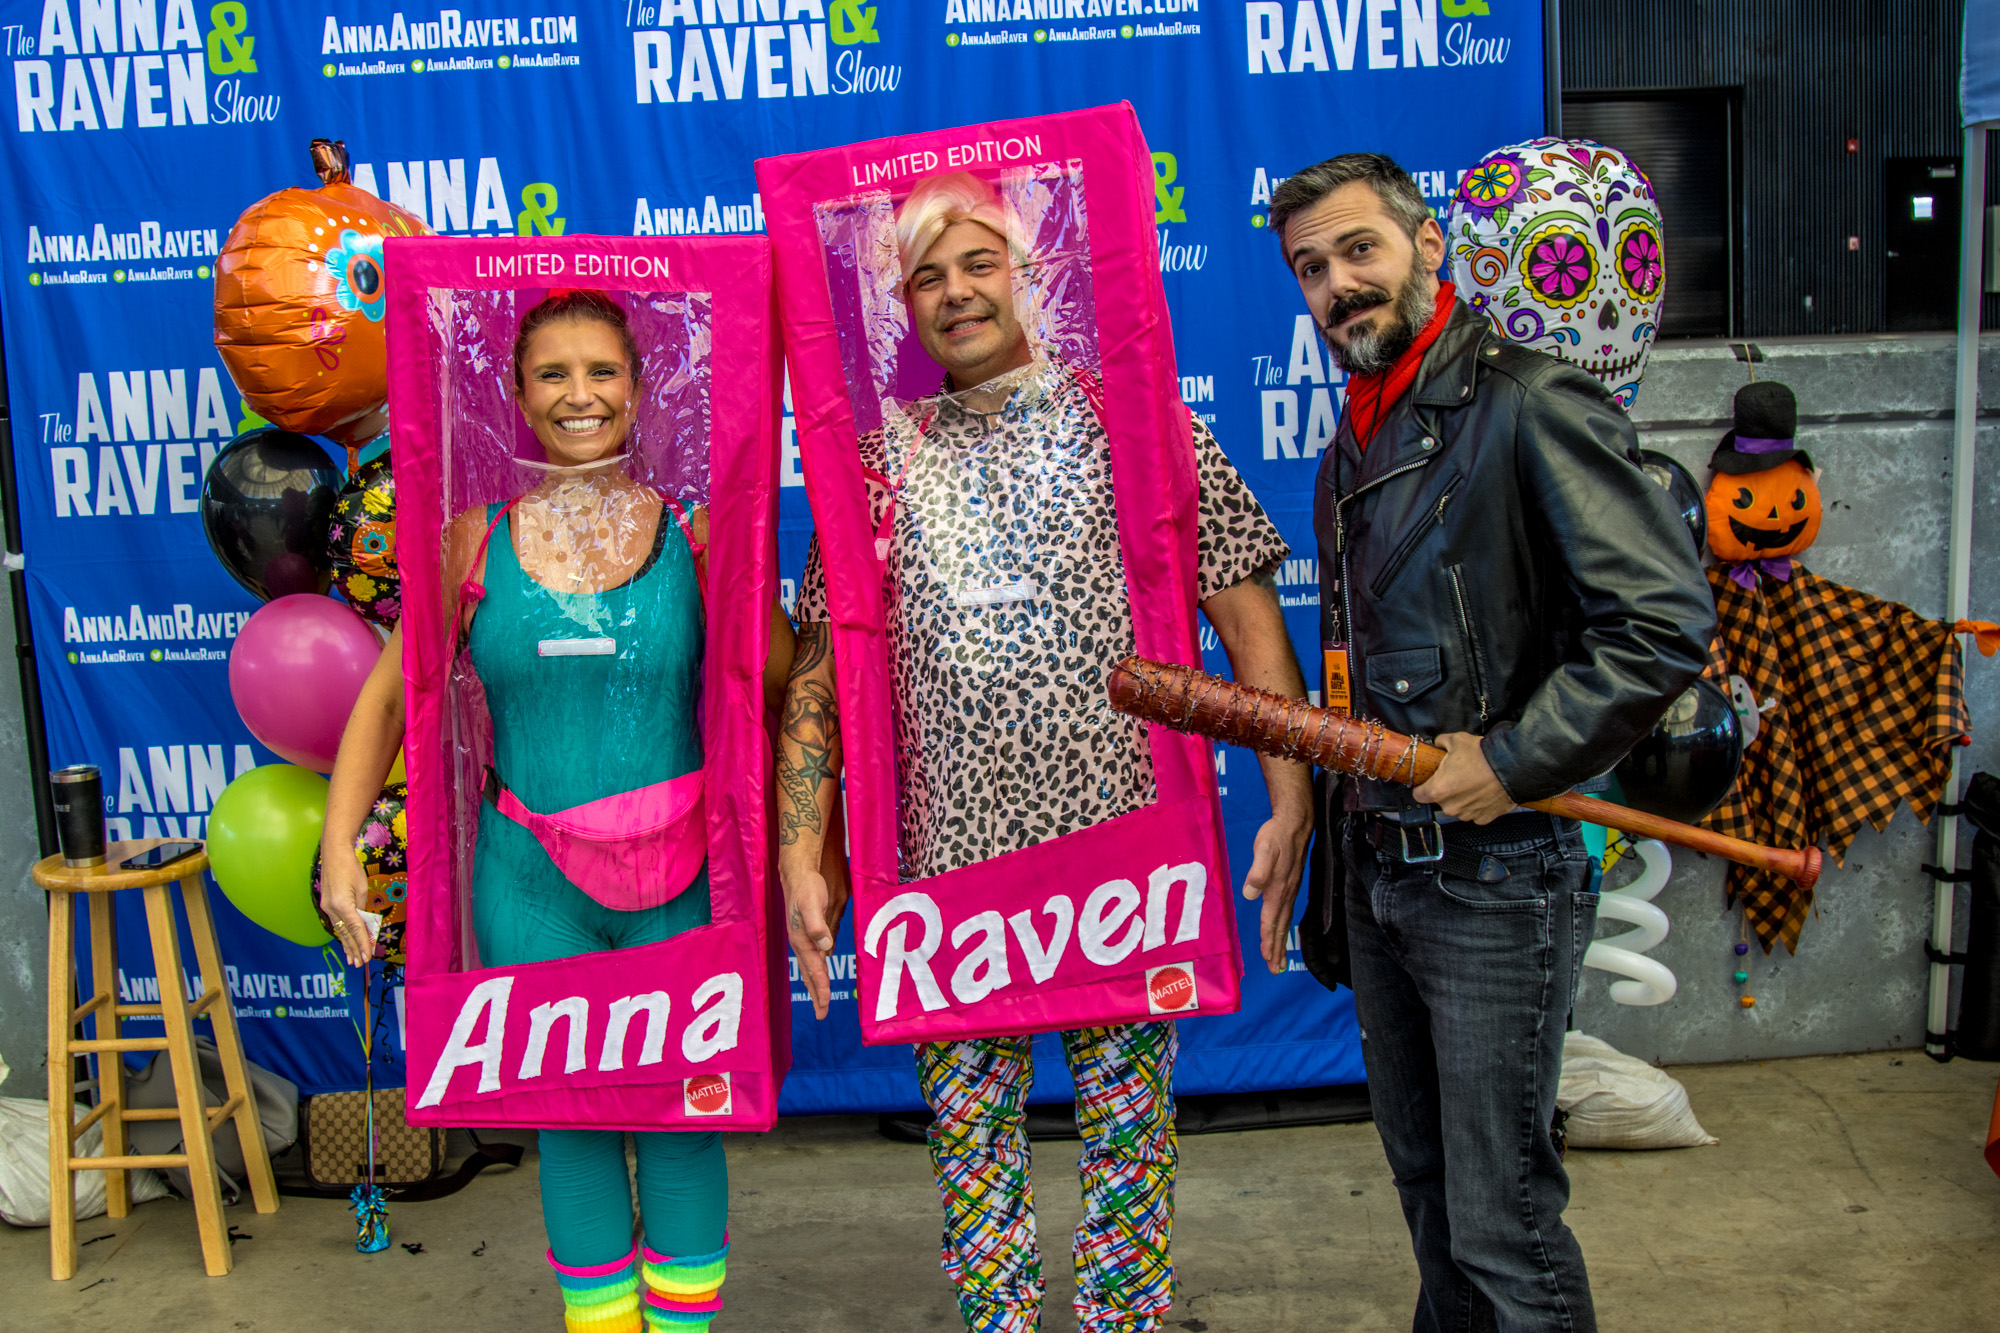 WATCH: Anna & Raven Clear Victory Painting Trick or Treat Day